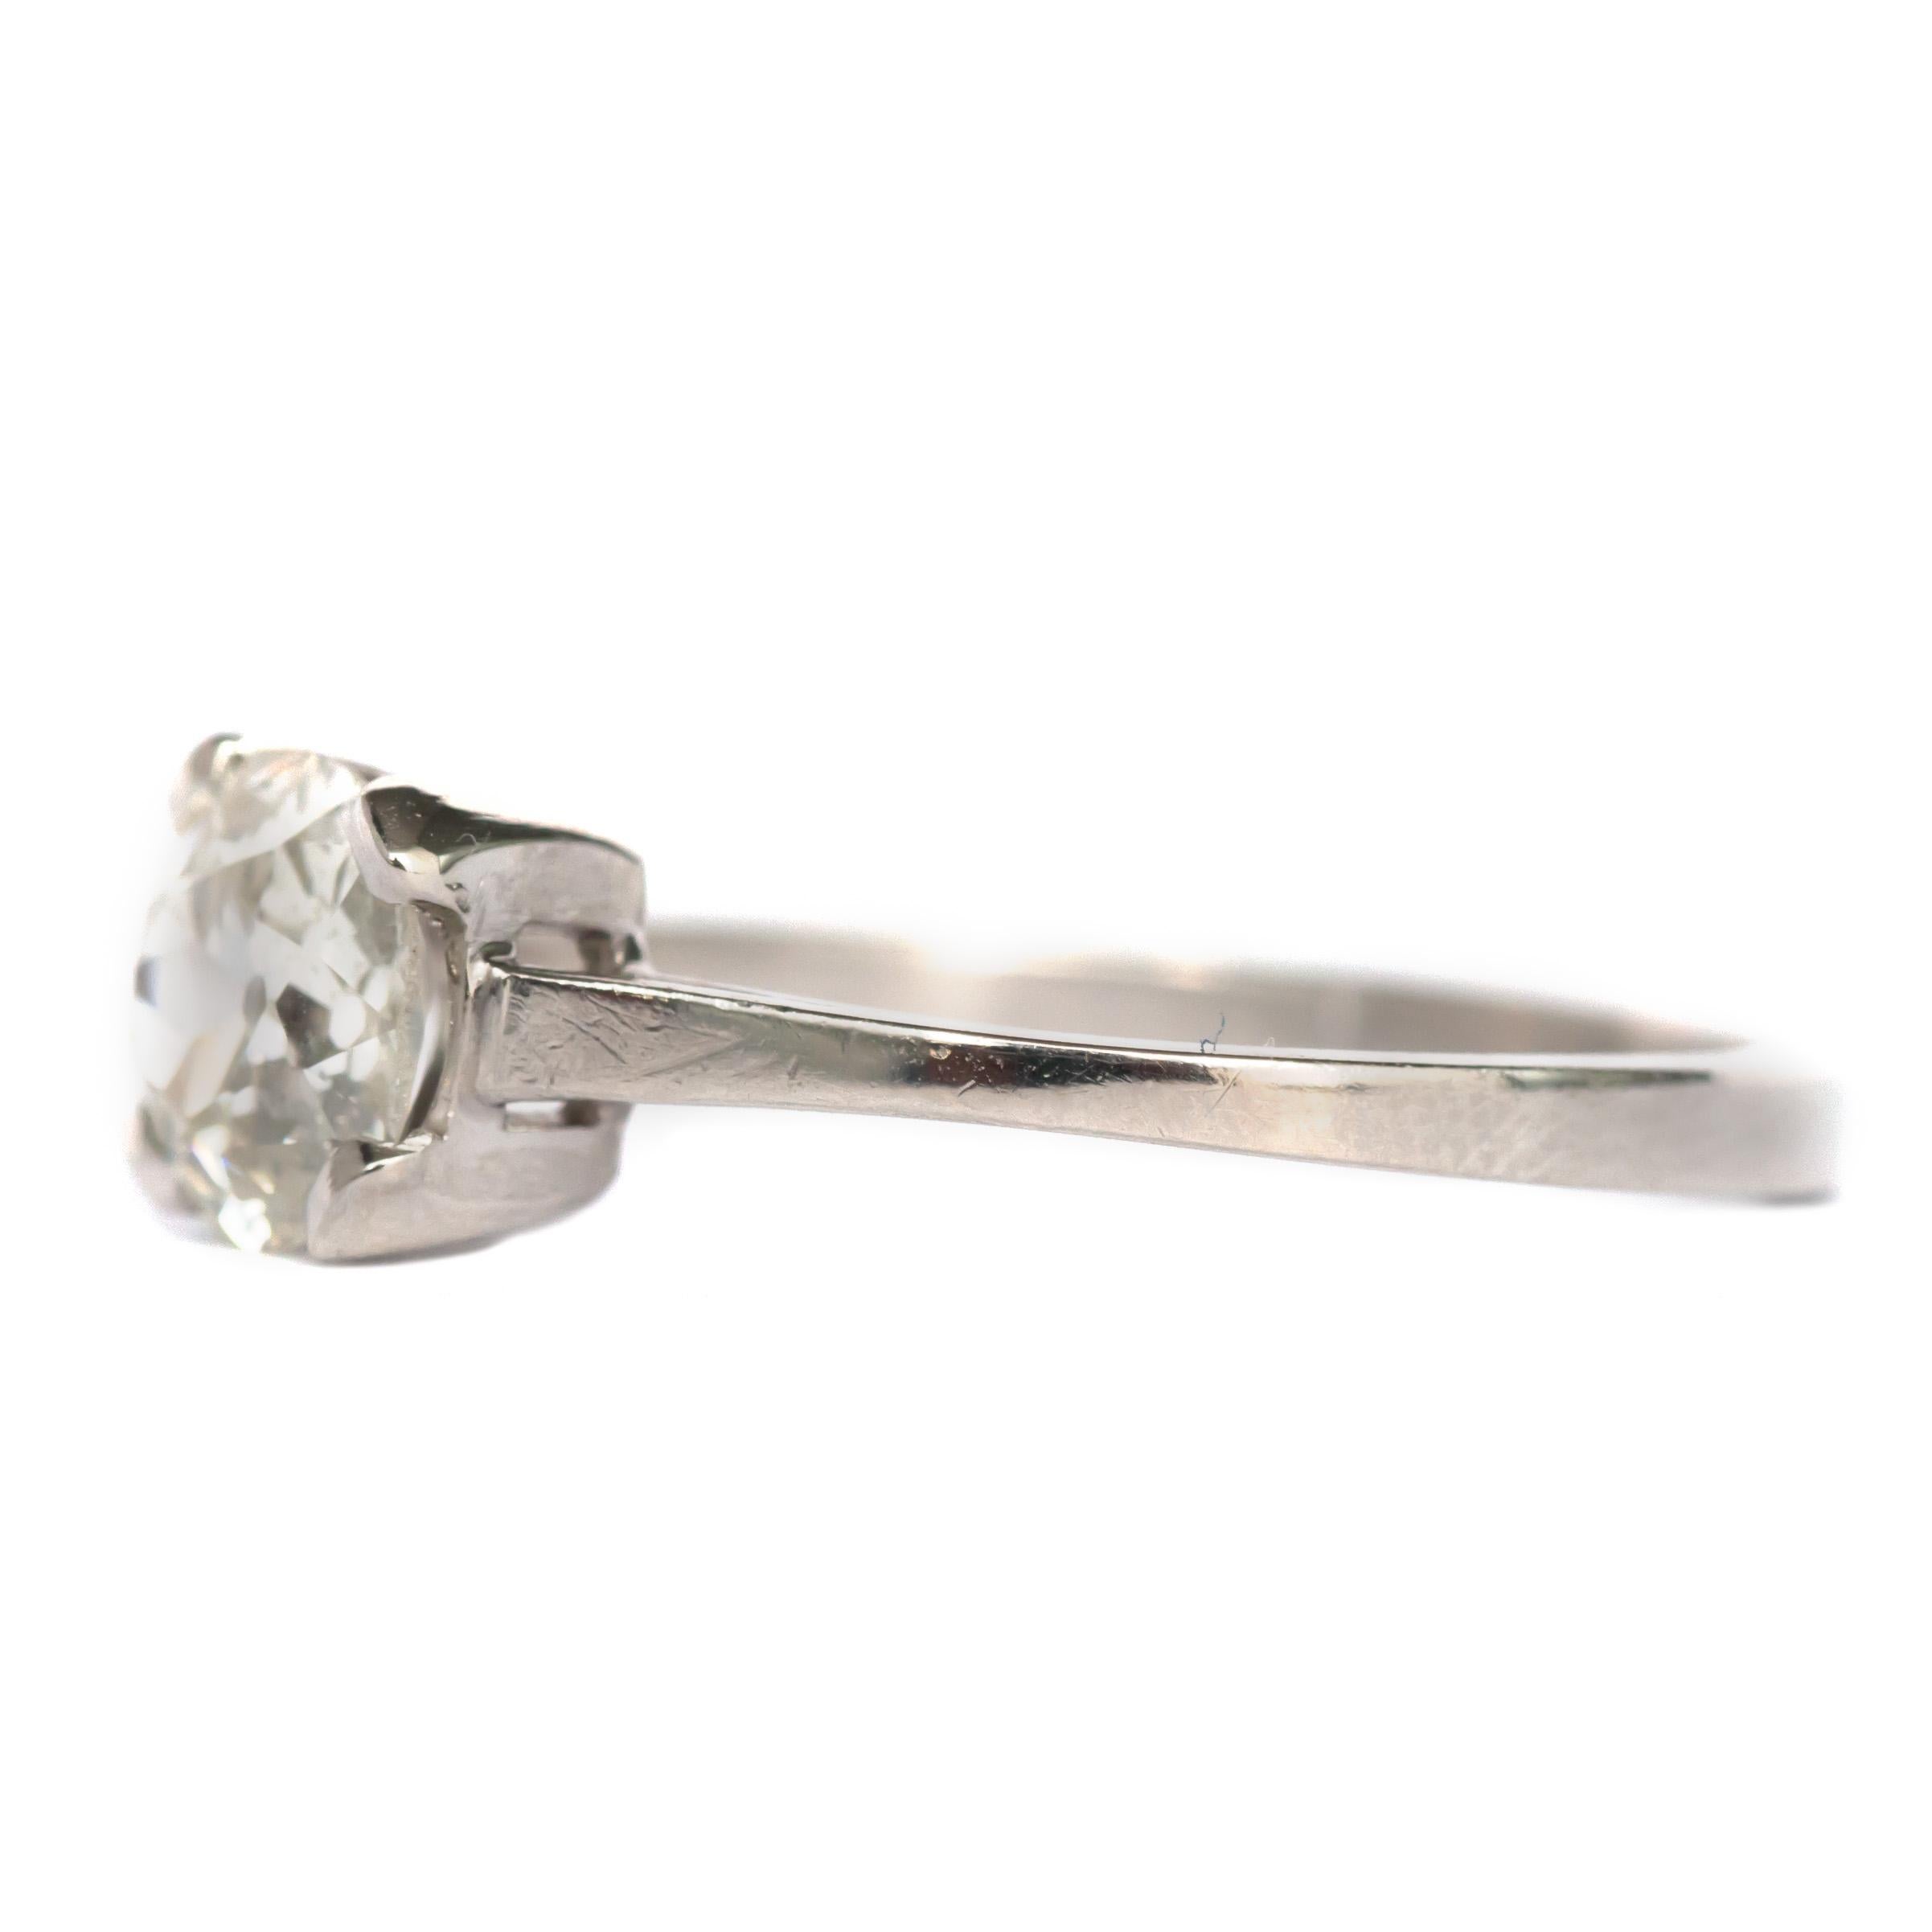 Ring Size: 8.5
Metal Type: Platinum
Weight: 3.6 grams

Center Diamond Details
Shape: Antique Cushion
Carat Weight: 1.13 carat
Color: J
Clarity: SI2

Finger to Top of Stone Measurement: 5.06mm